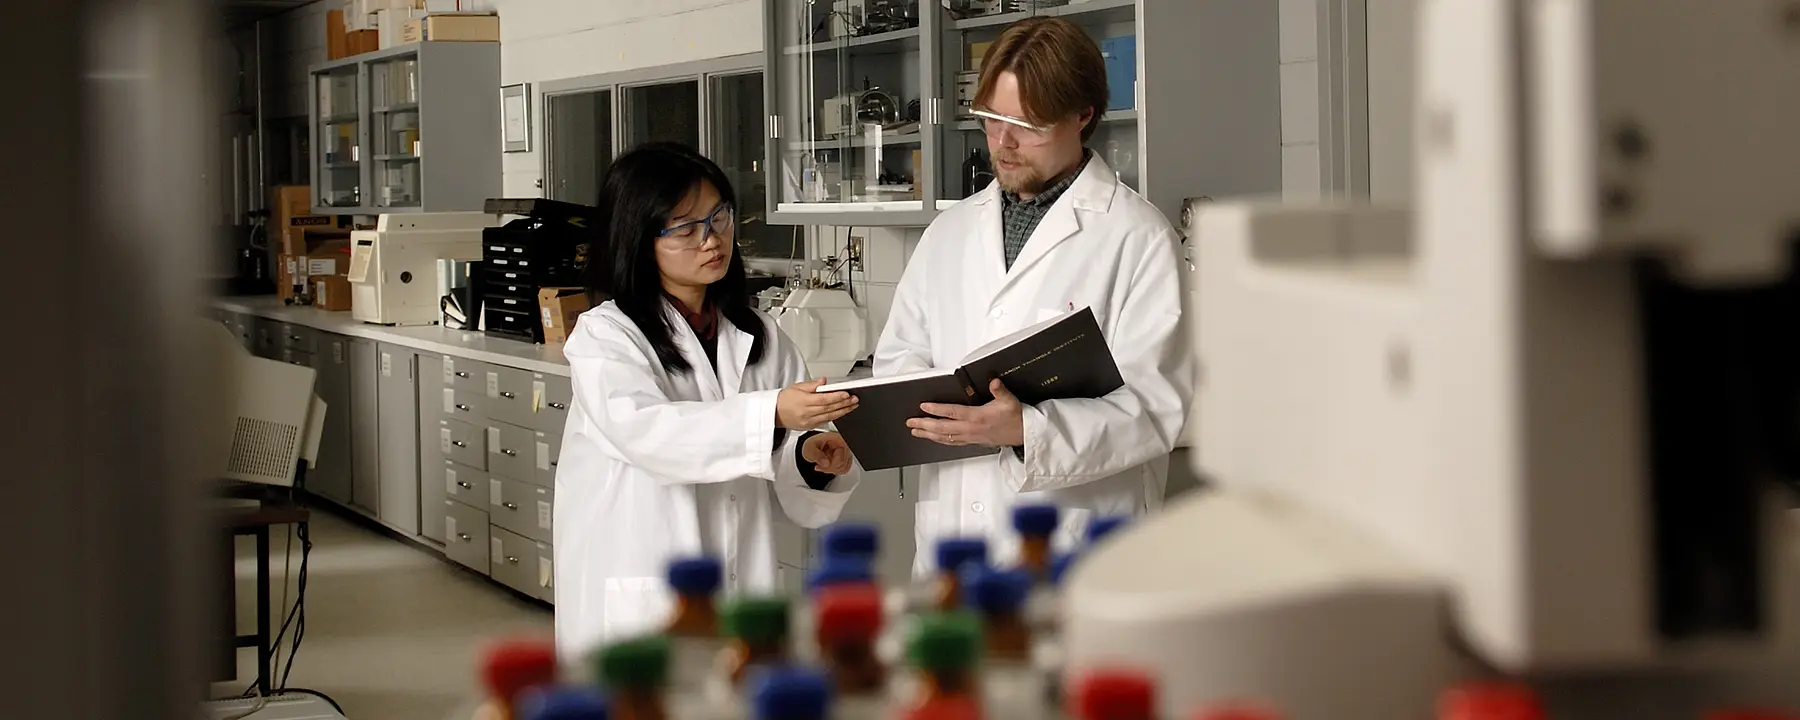 Researchers in a lab working on polymeric material